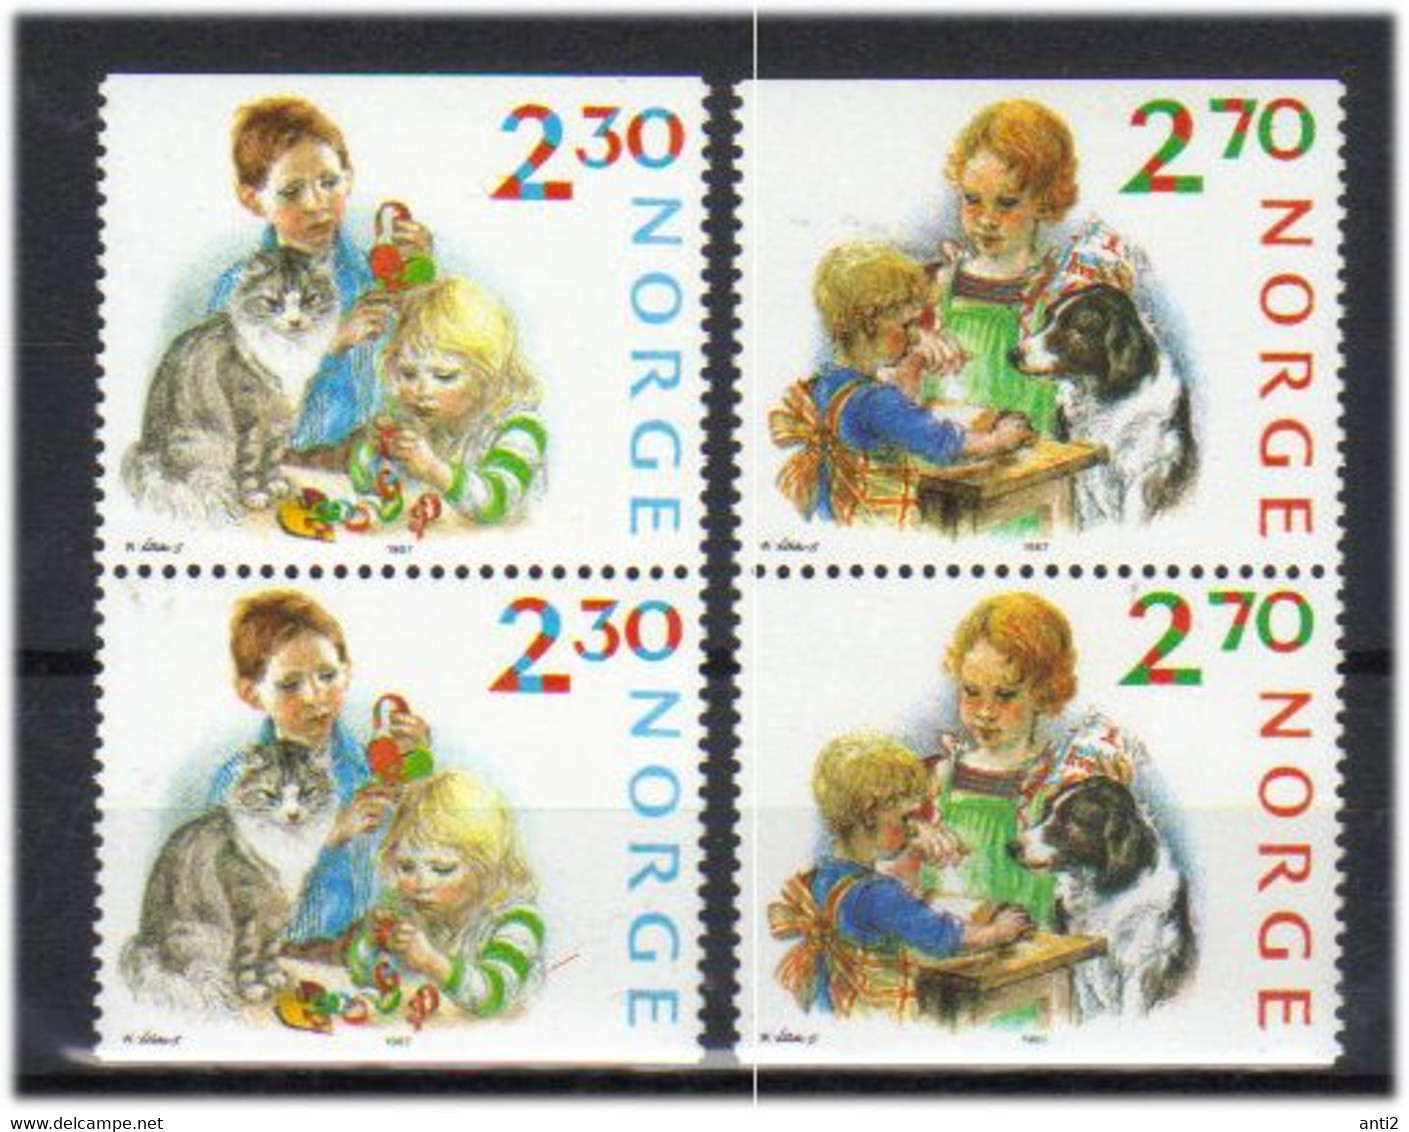 Norway 1987 Christmas. Children Make Christmas Decorations, Cat. Children Bake Gingerbread, Dog, Mi 984-985 Pairs MNH - Unused Stamps